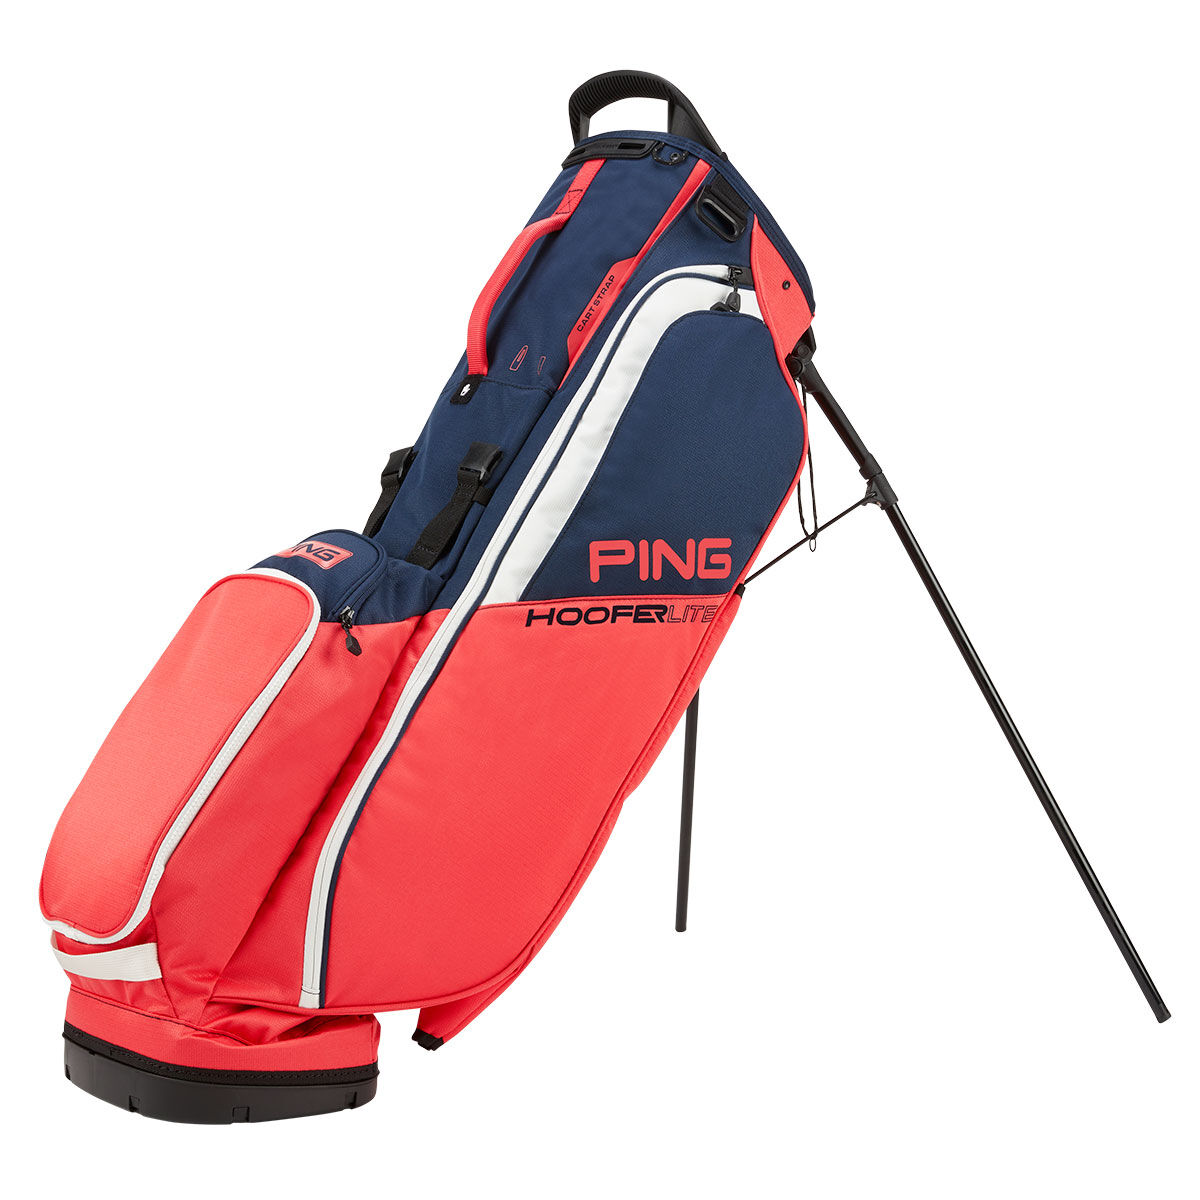 PING Hoofer Lite 231 Golf Stand Bag, Sailor red/navy/white | American Golf von Ping